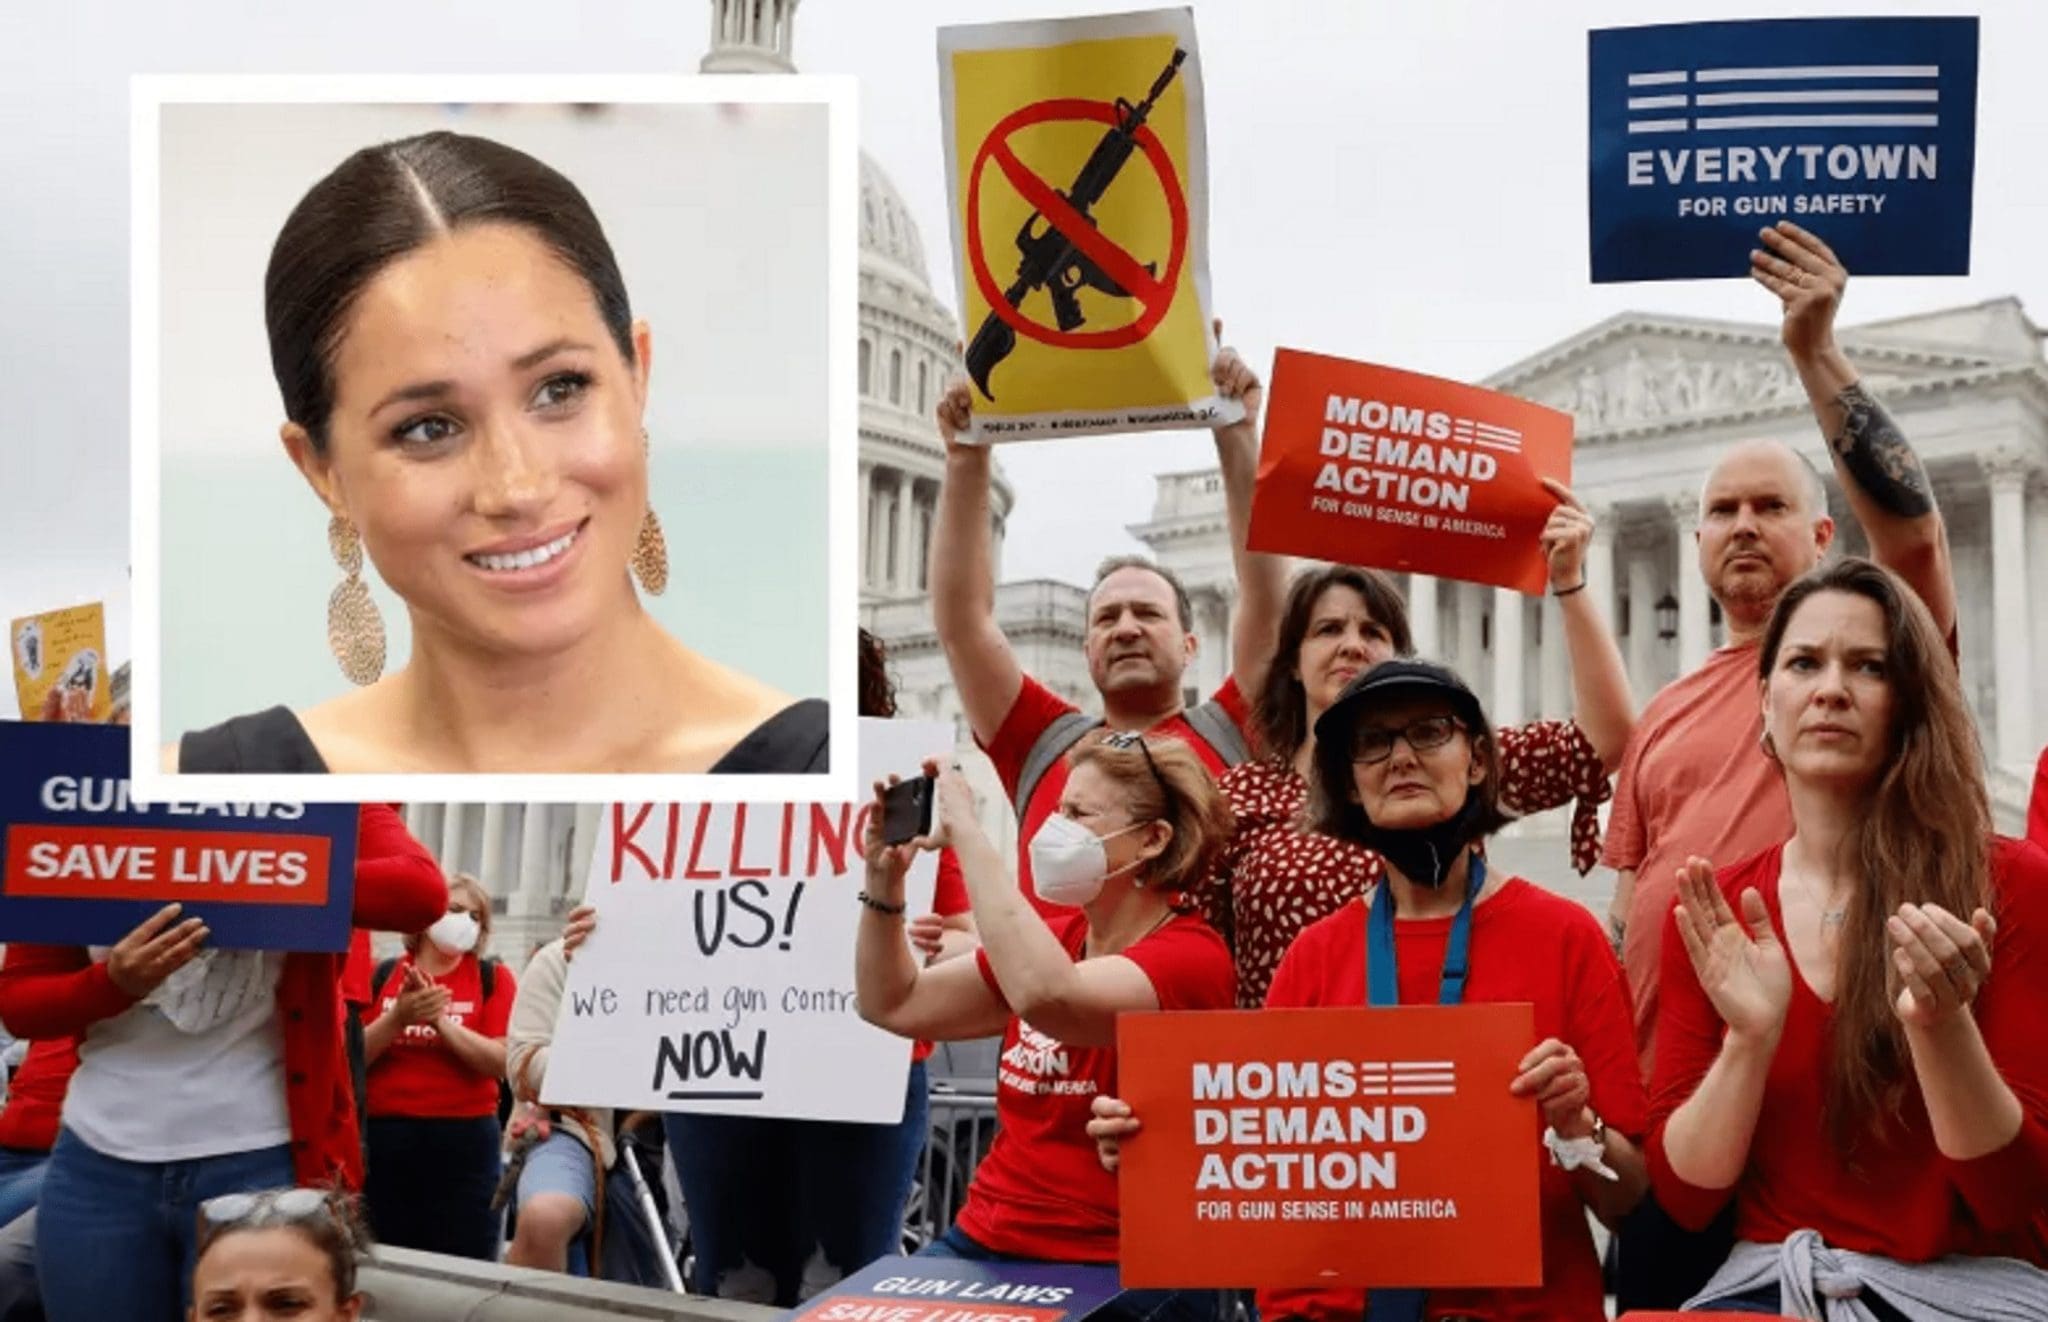 Meghan Markle advocates a complete ban on free-trafficking guns in the US